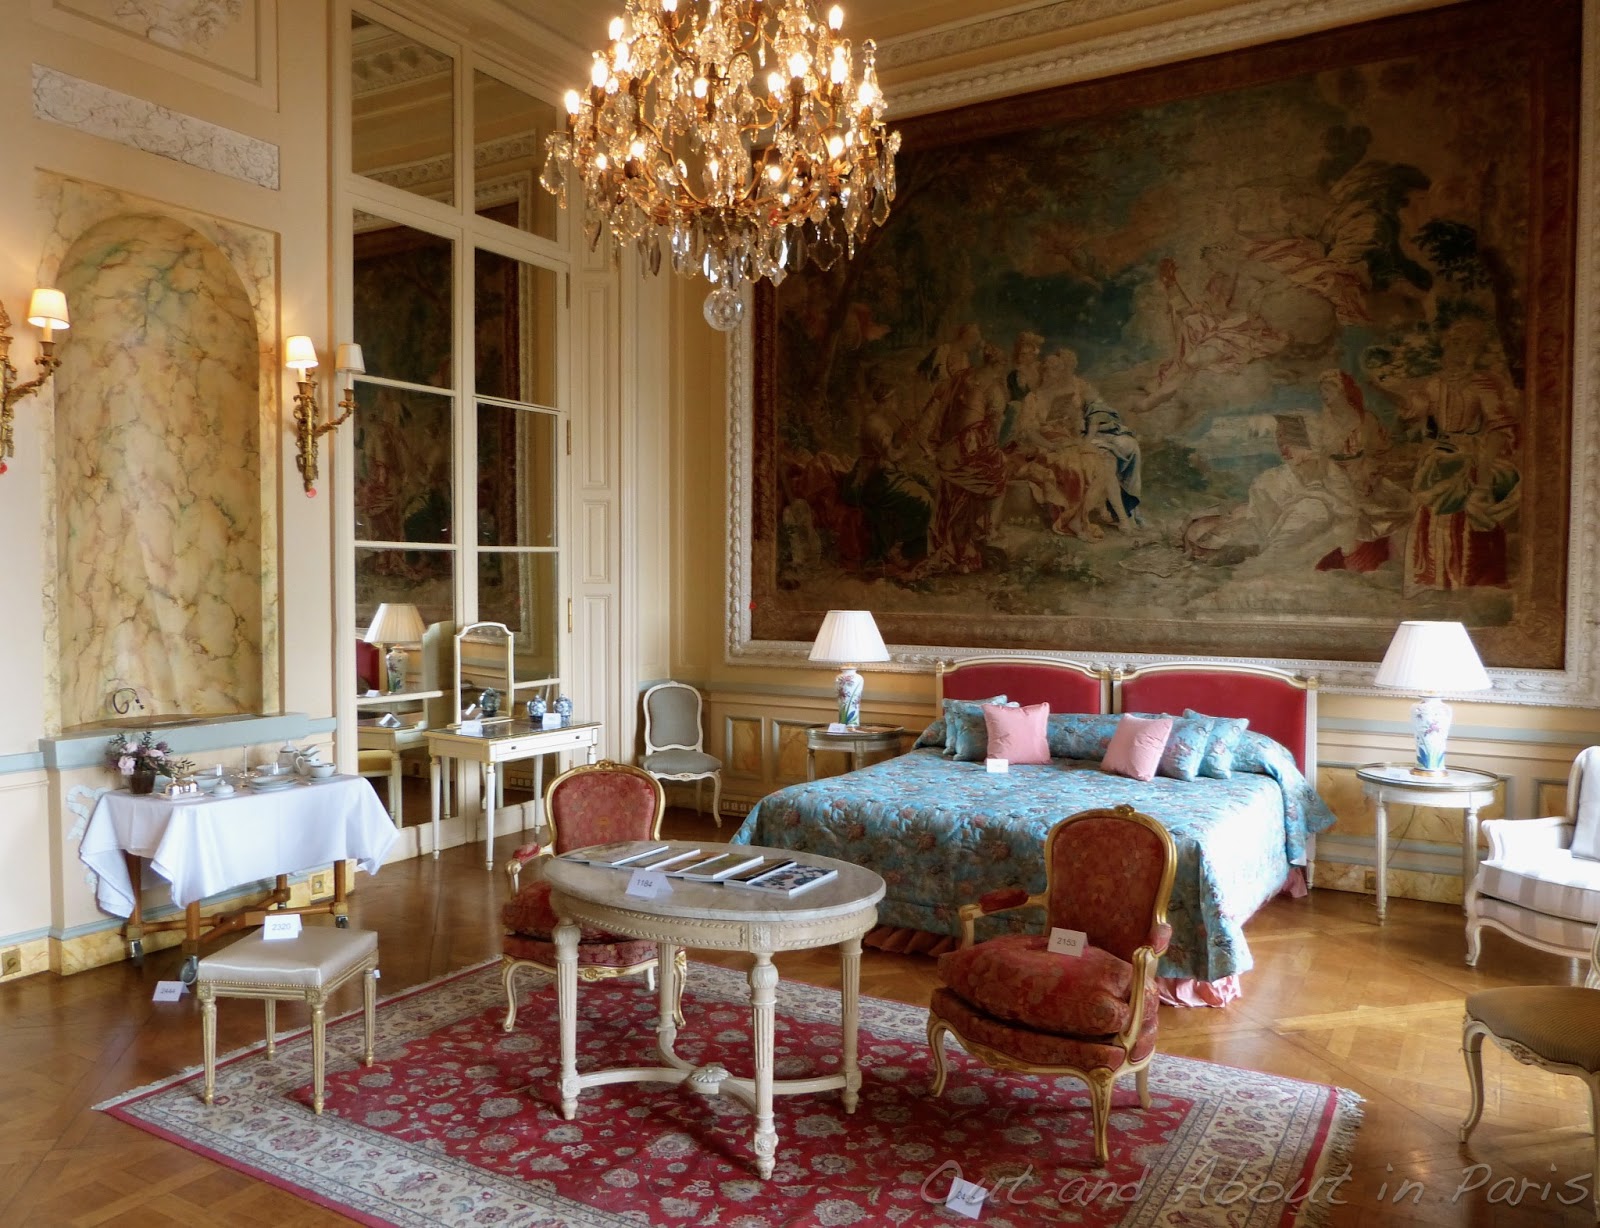 For Sale - 3,500 Objects from the Hôtel de Crillon in Paris!